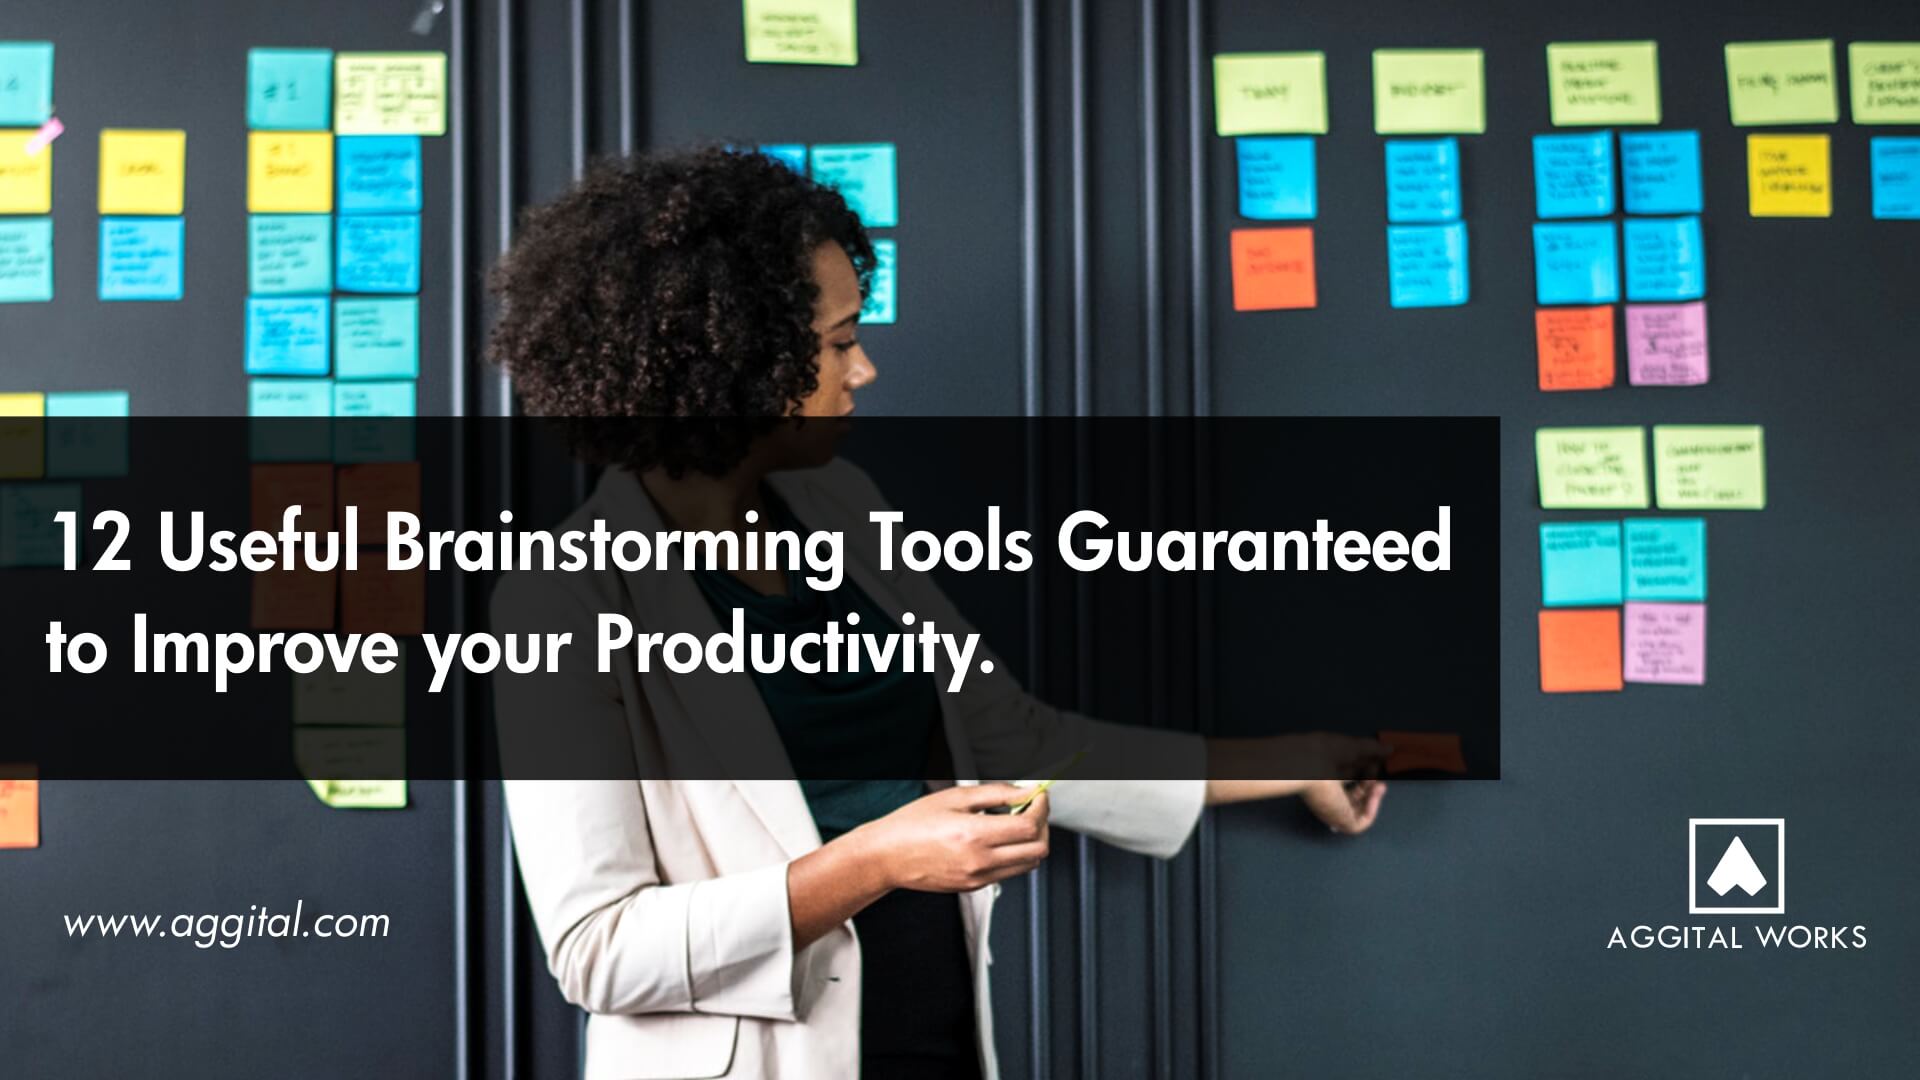 12 Useful Brainstorming Tools Guaranteed to Improve your Productivity.